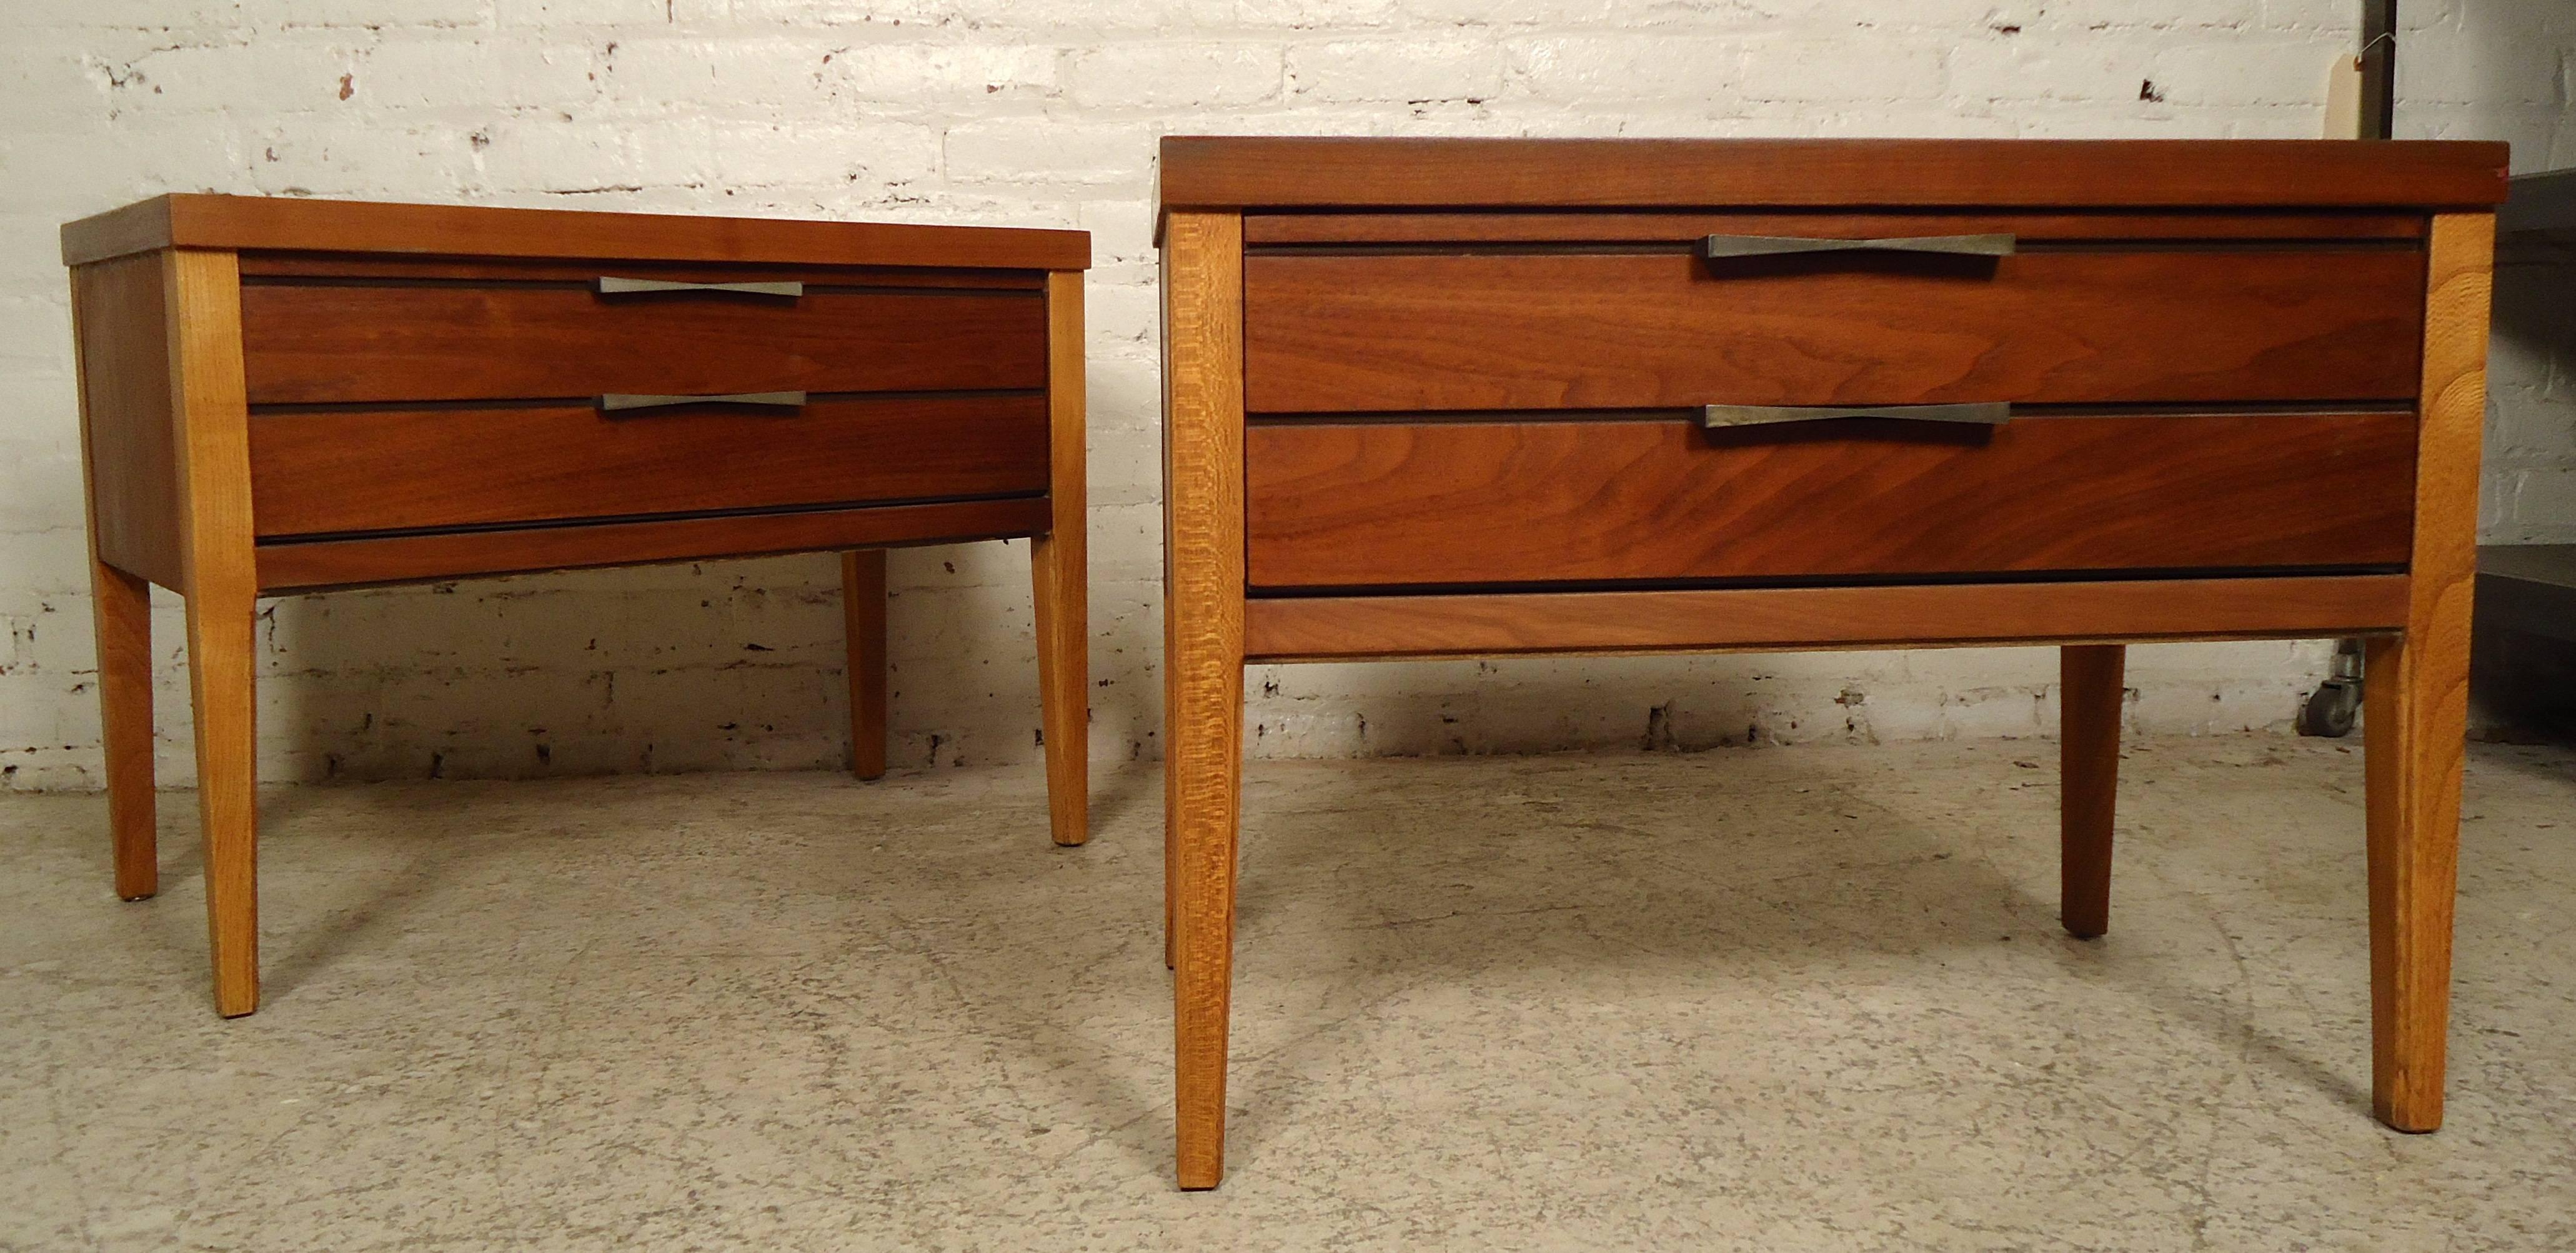 Impressive vintage-modern two-tone nightstands by Lane features an elegant bow tie inlay design on the surface, one drawer with two metallic handles, and sturdy legs.

Please confirm item location (NY or NJ).